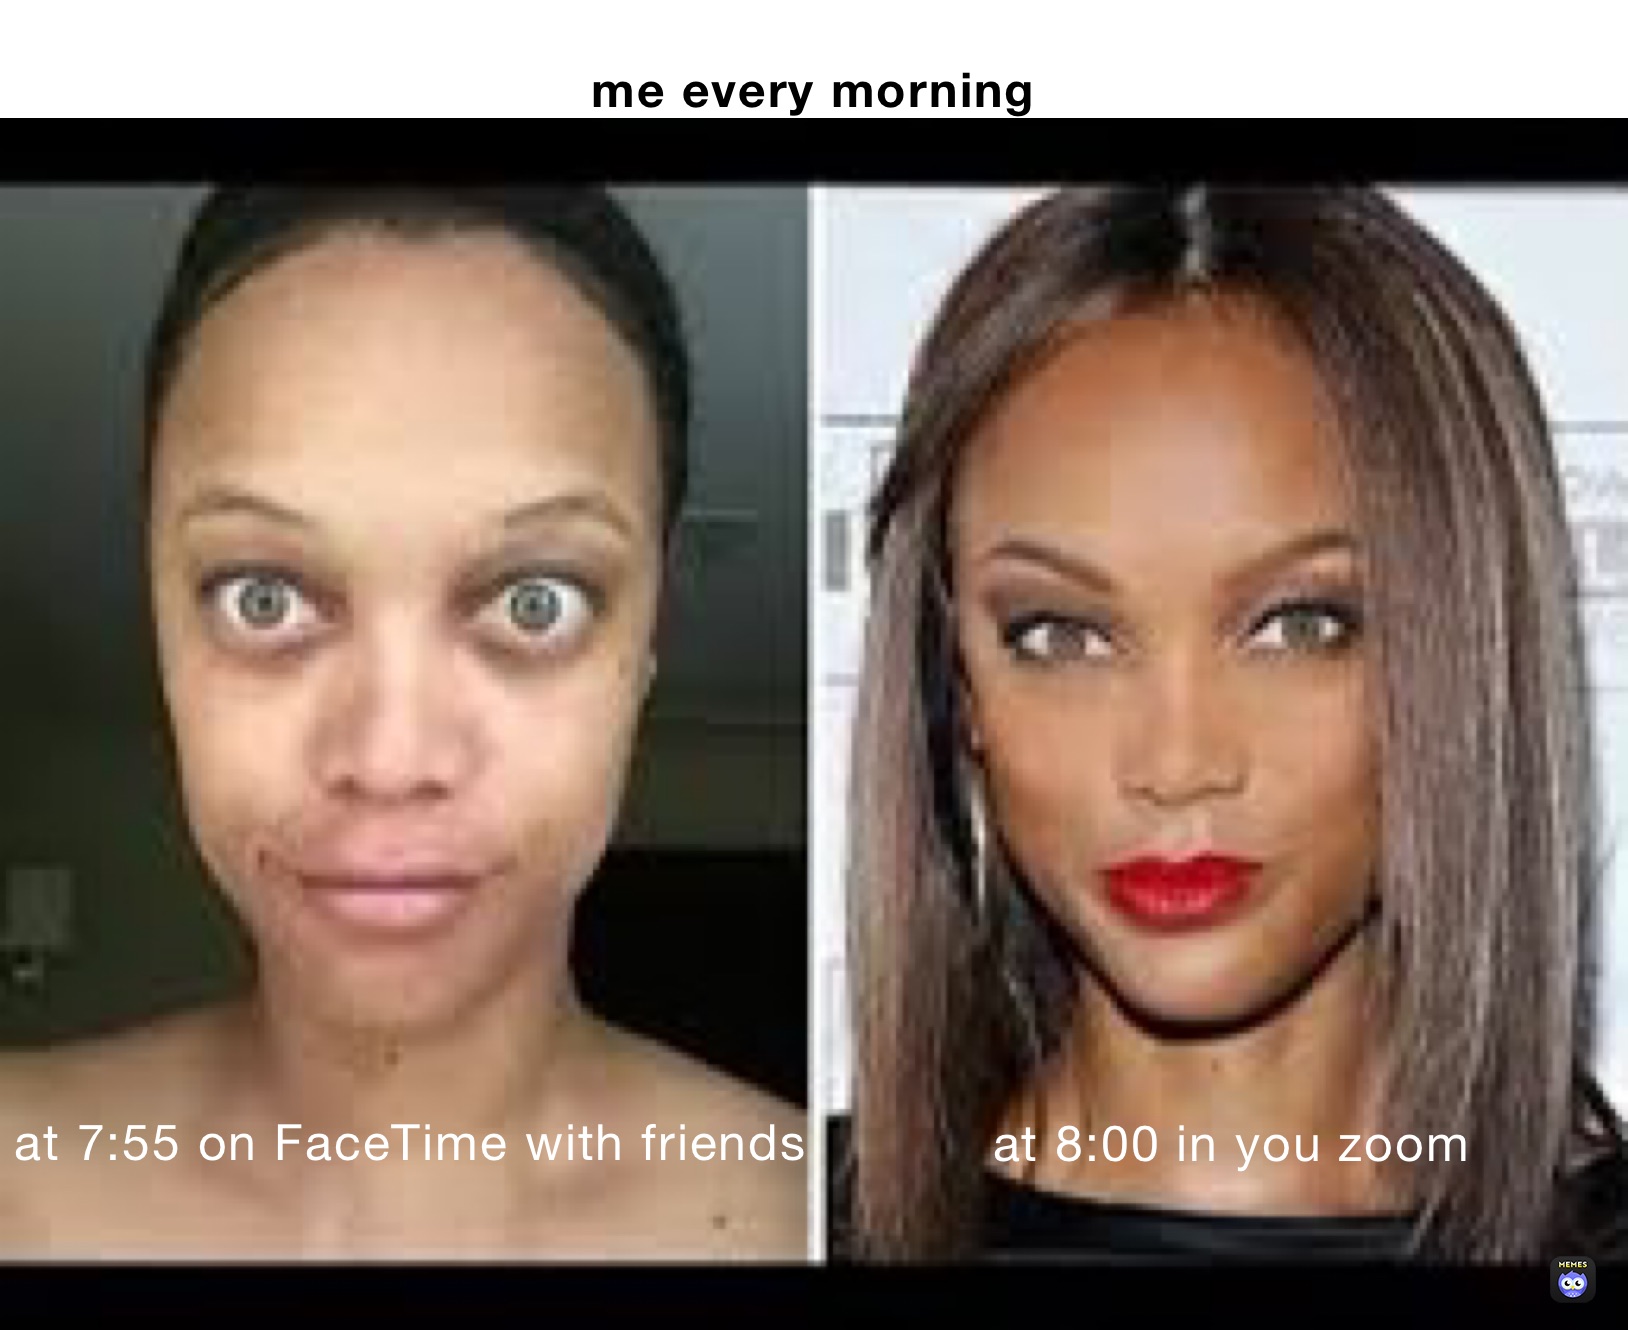                              
me every morning 